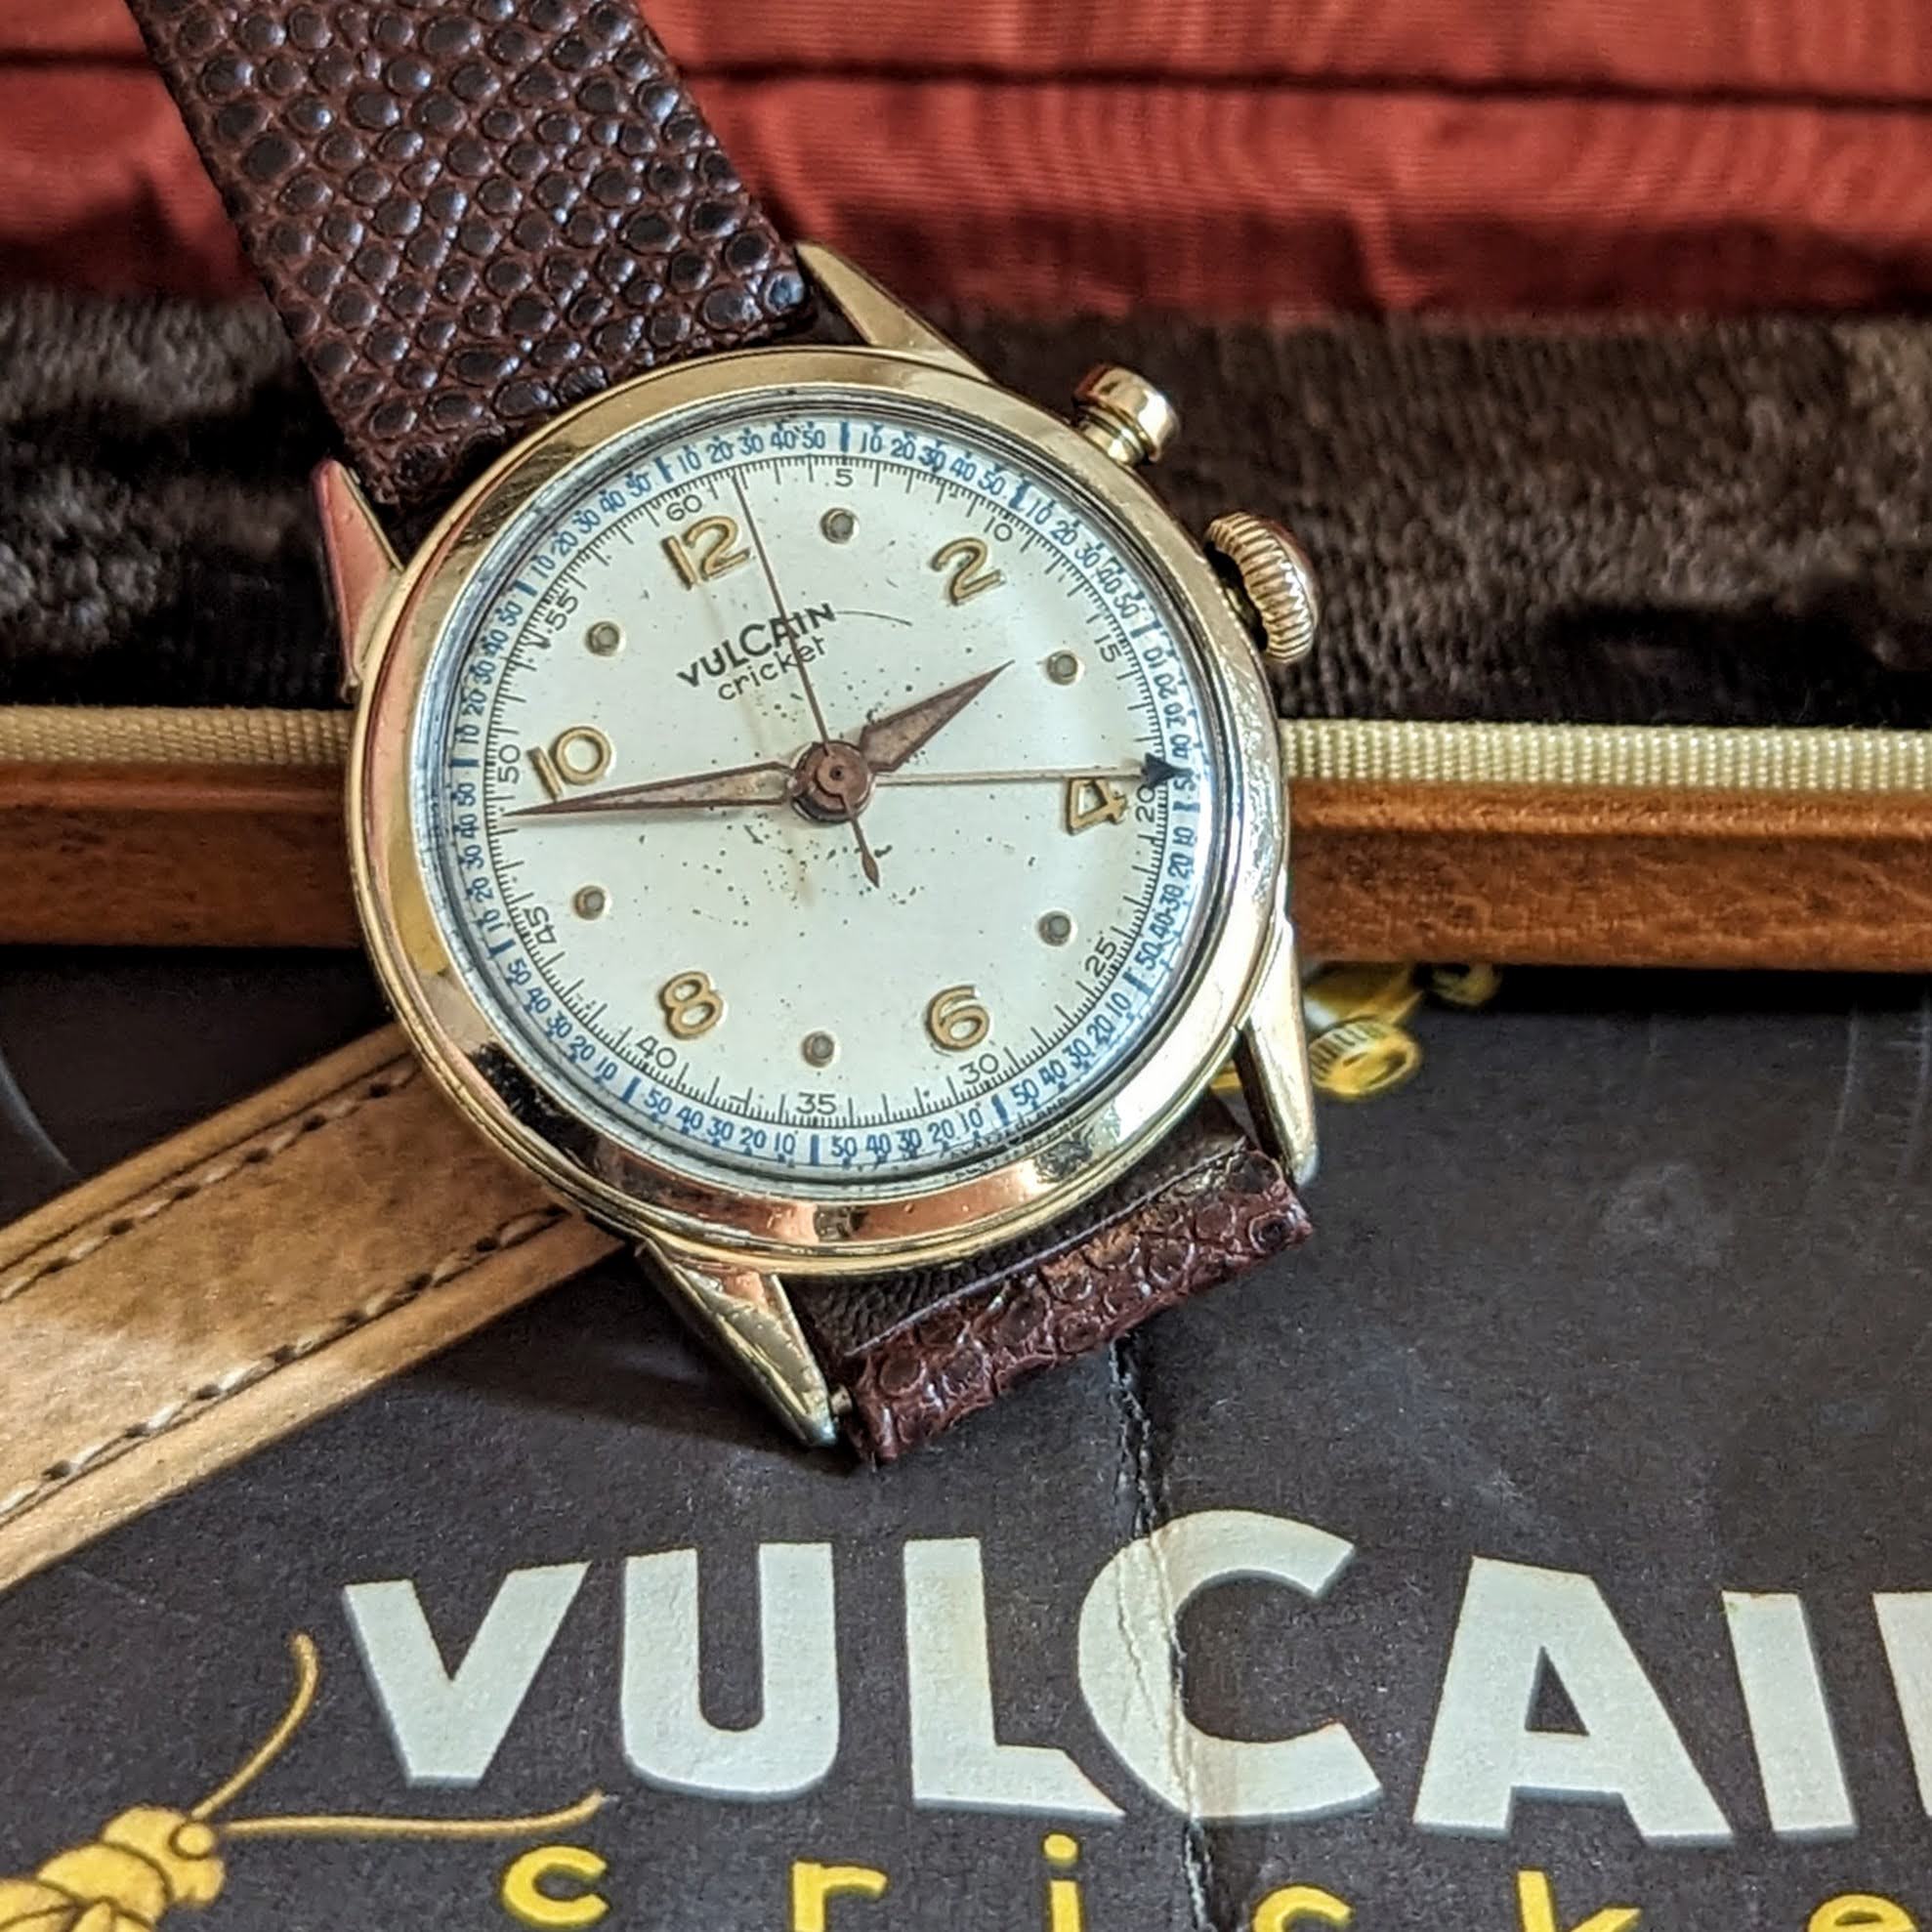 VULCAIN Cricket Alarm Wristwatch 17 Jewels Cal. 120 Swiss Made Vintage Watch - Box & Papers!